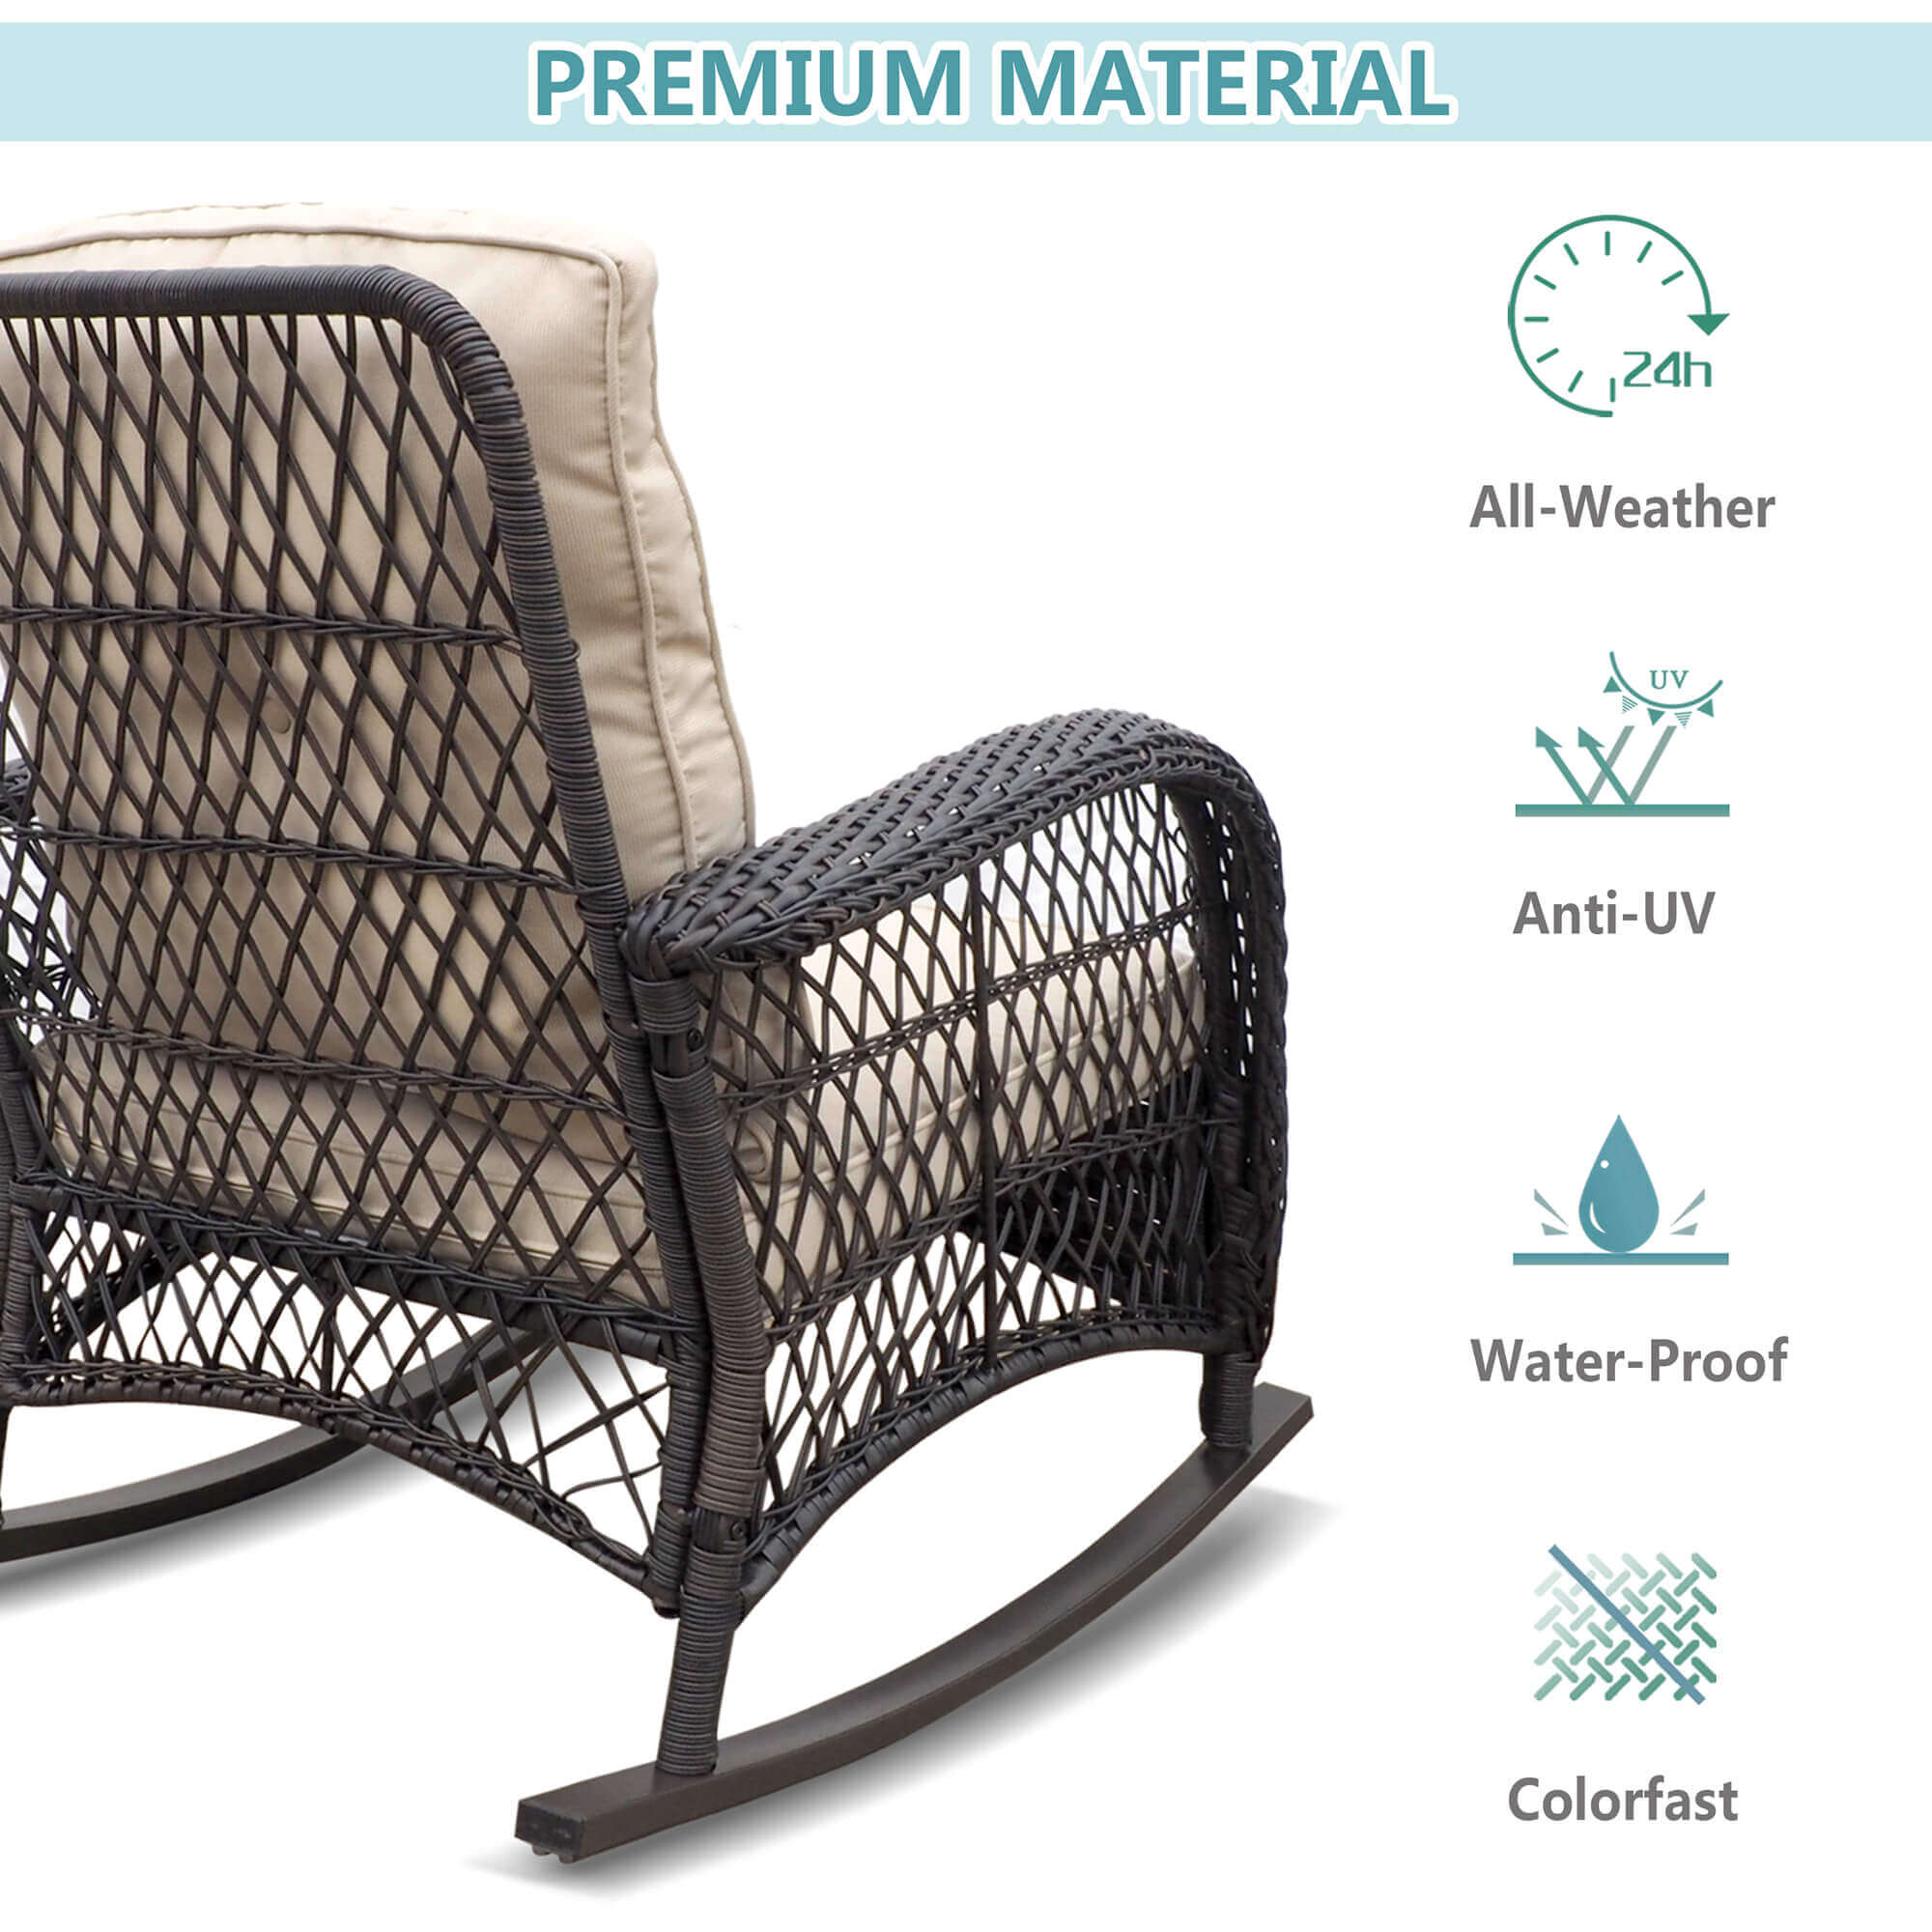 3 Pieces Outdoor Wicker Rocking Chair Set/Patio Conversation Set with 2 Rattan Rocker Chairs and Glass Coffee Table